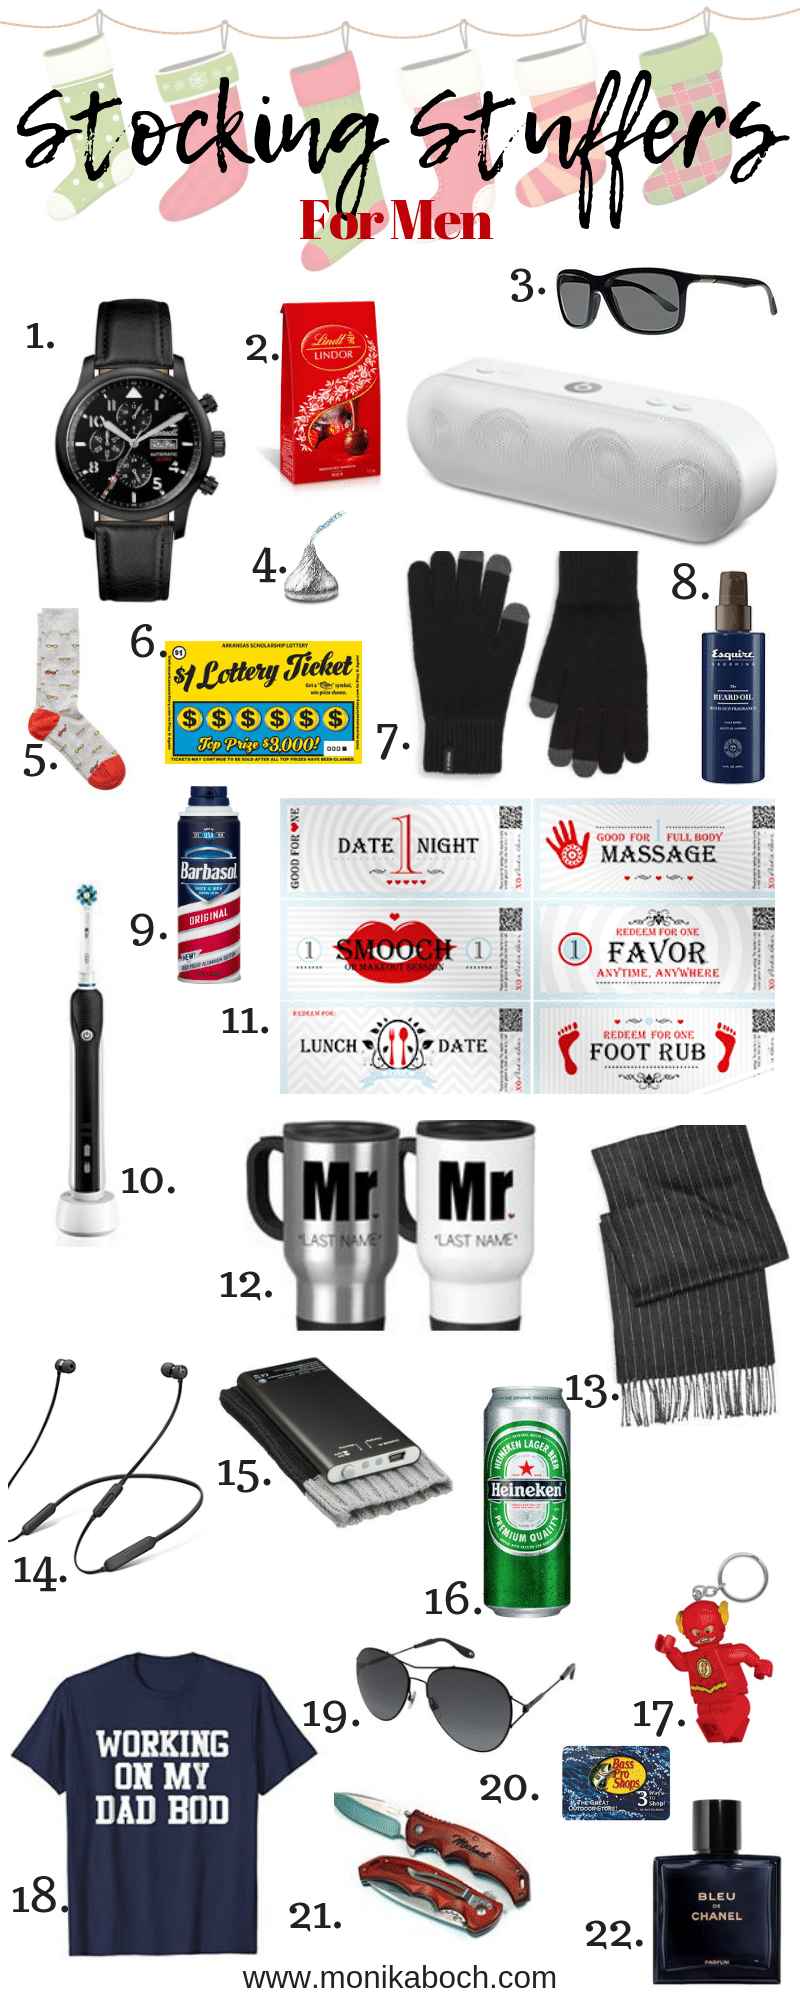 21 Perfect Stocking Stuffers for Men - Christmas Gifts for Men